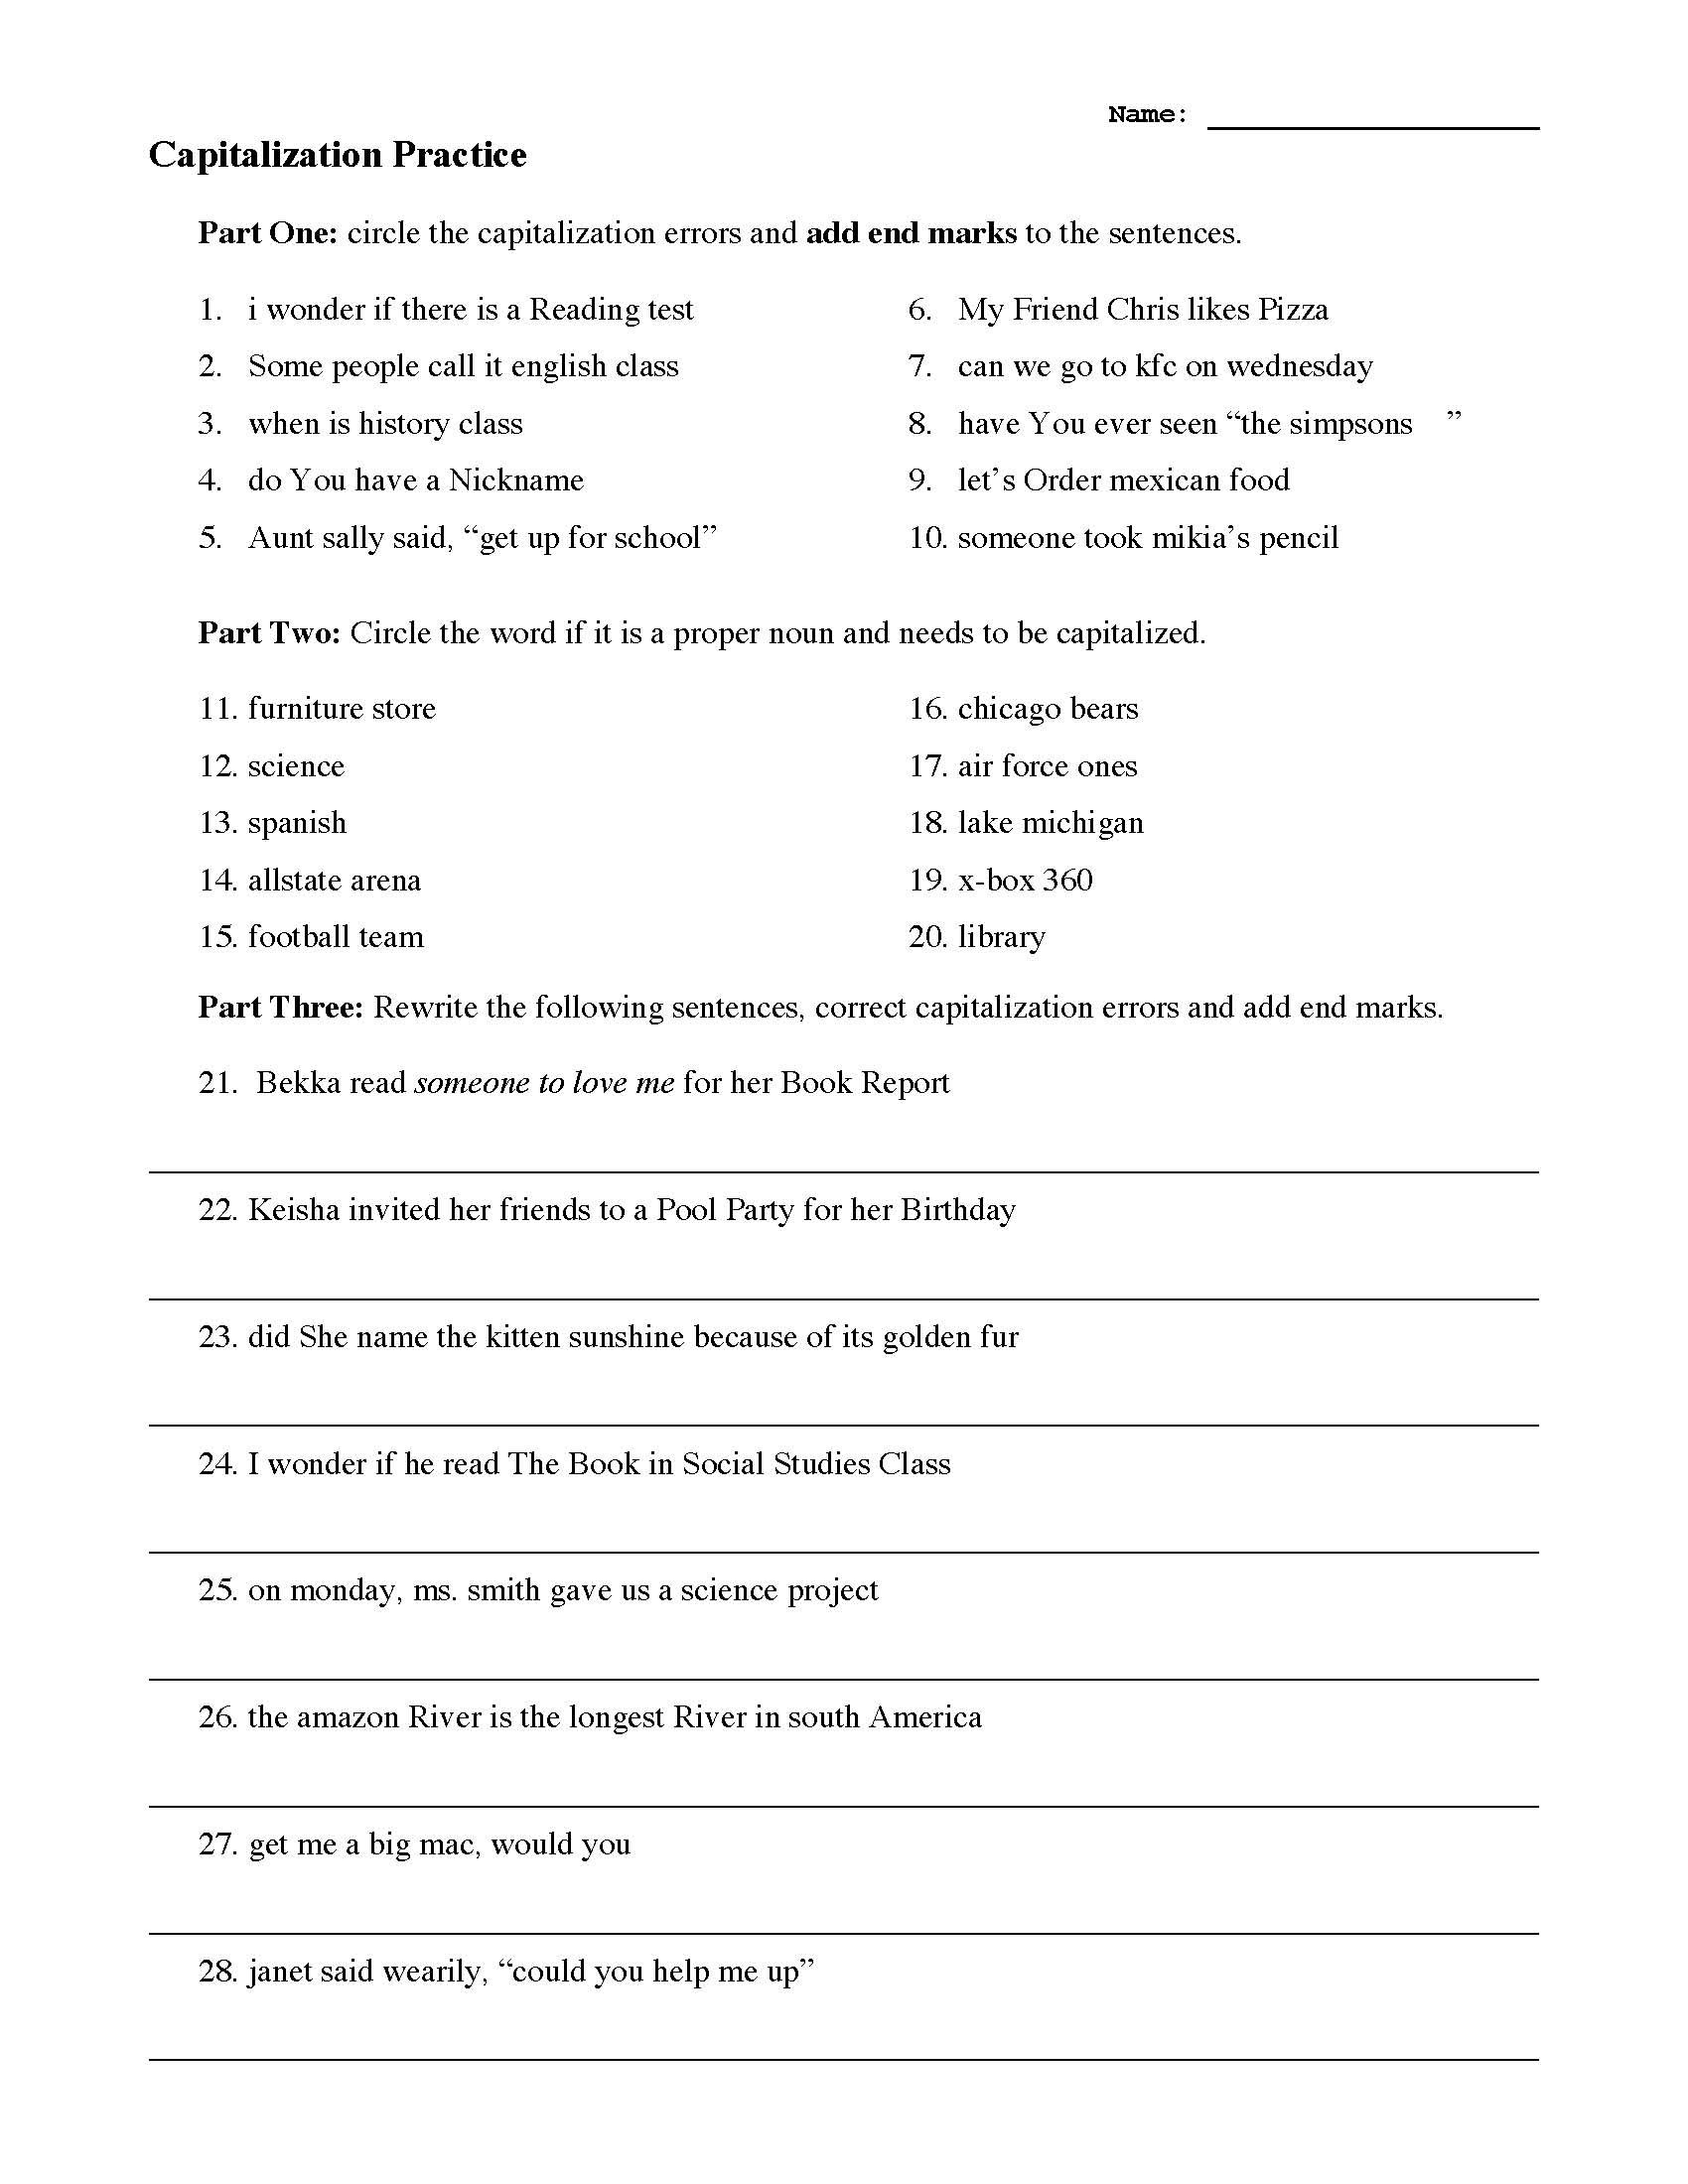 Did You Get It Answer Key Did You Get It Spanish Worksheet Answers Also Did You Get It Spanish Worksheet Answers